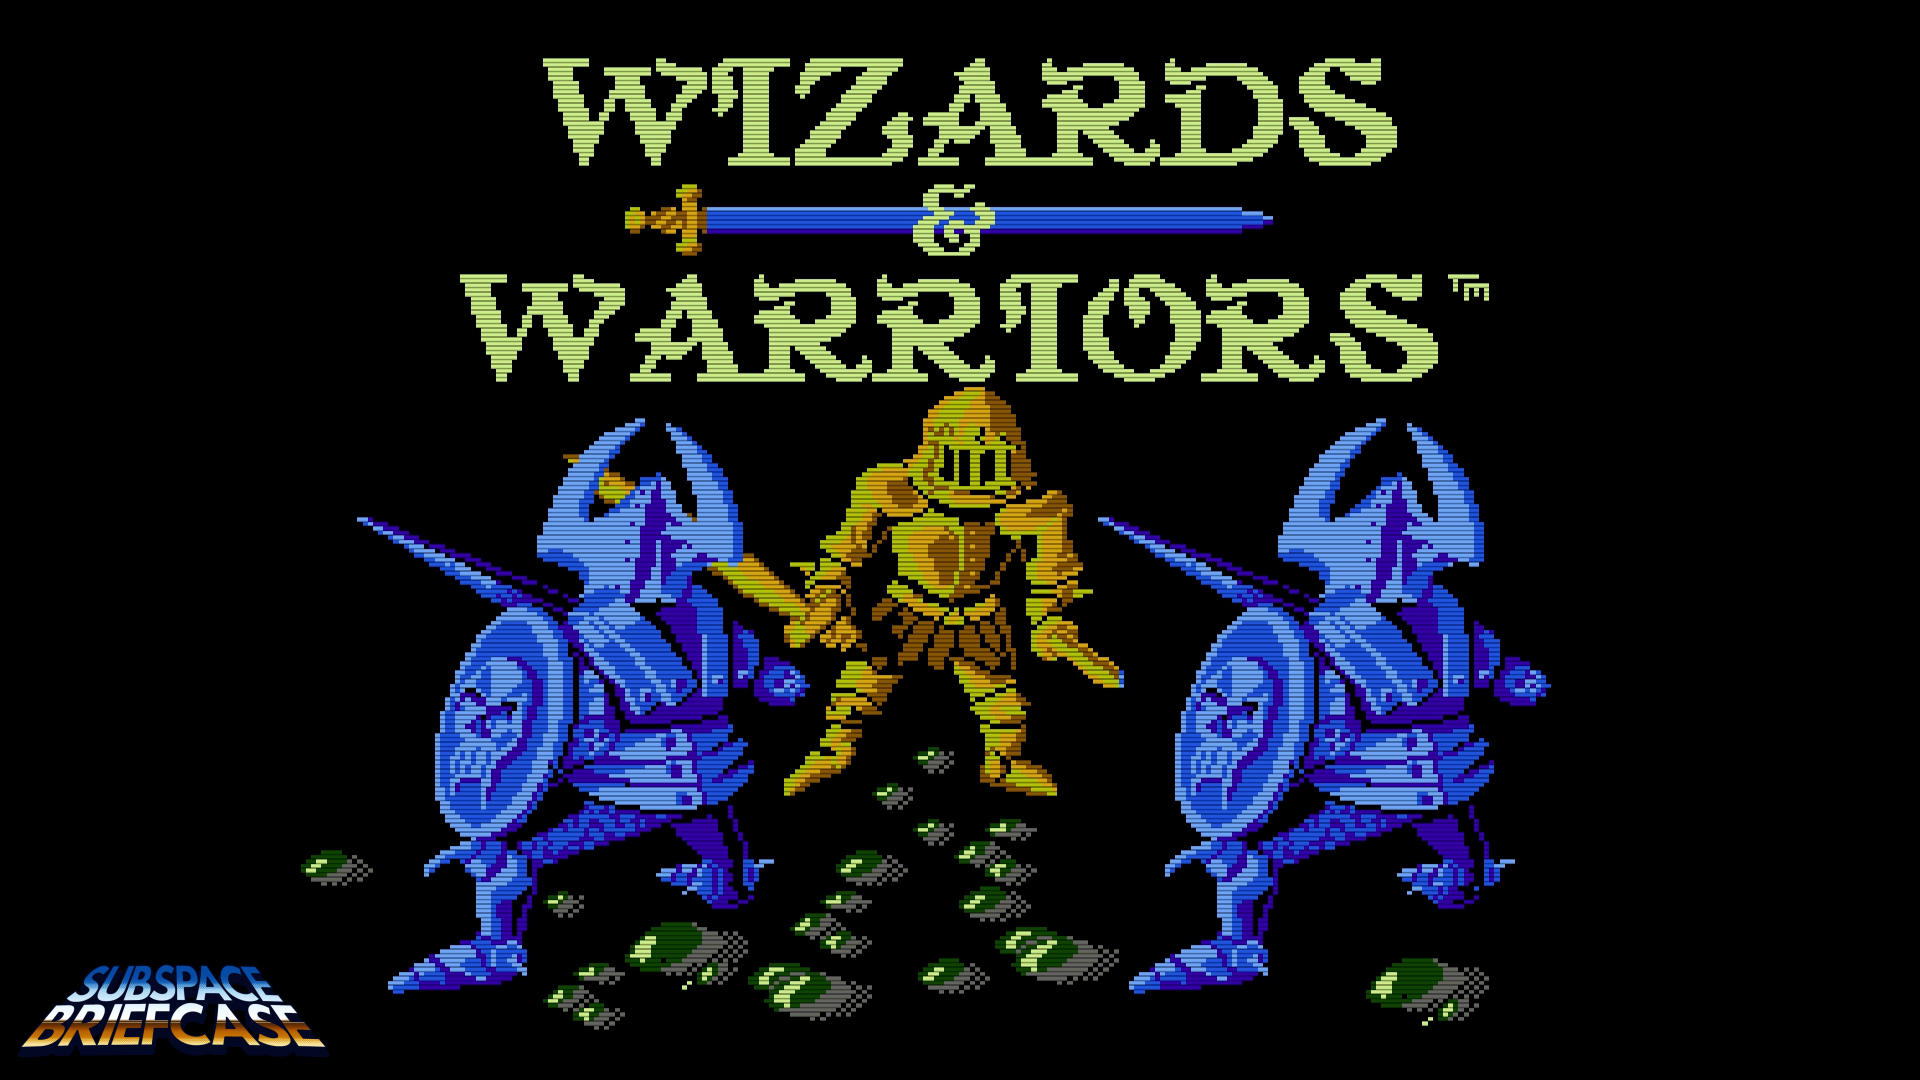 Wizards & Warriors | Subspace Briefcase1920 x 1080